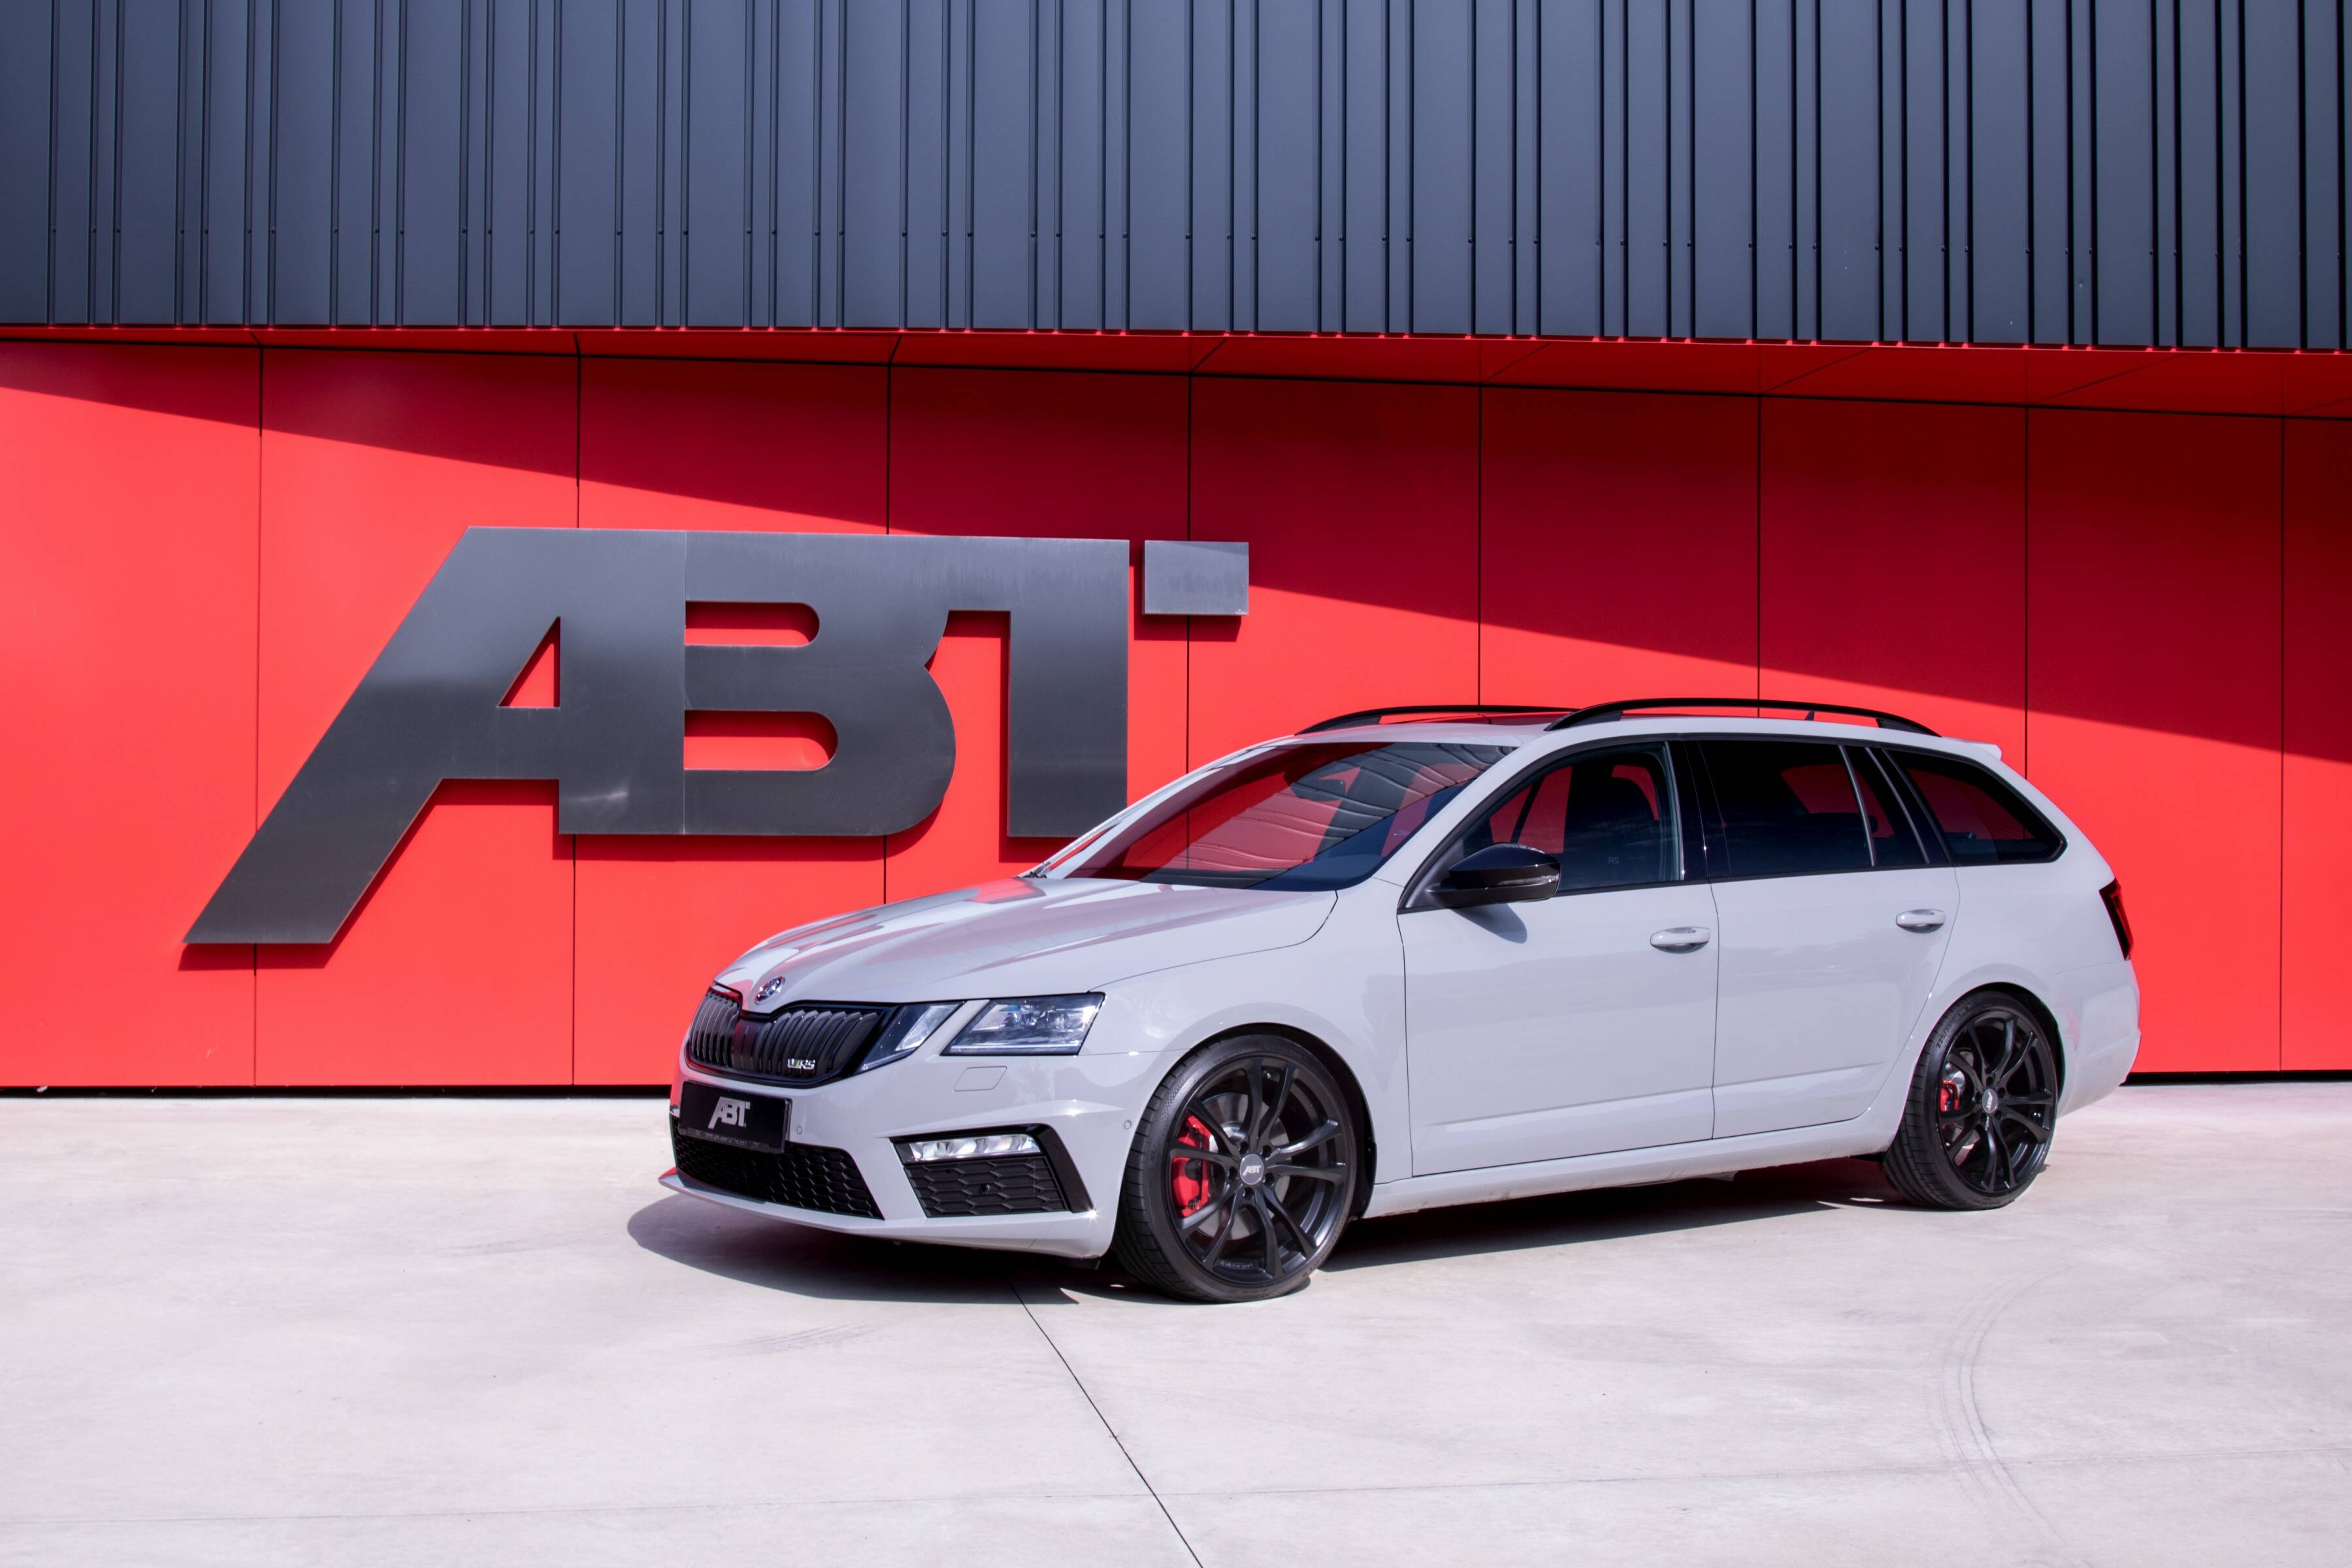 ABT equips the Skoda Octavia with 315 HP and other performance